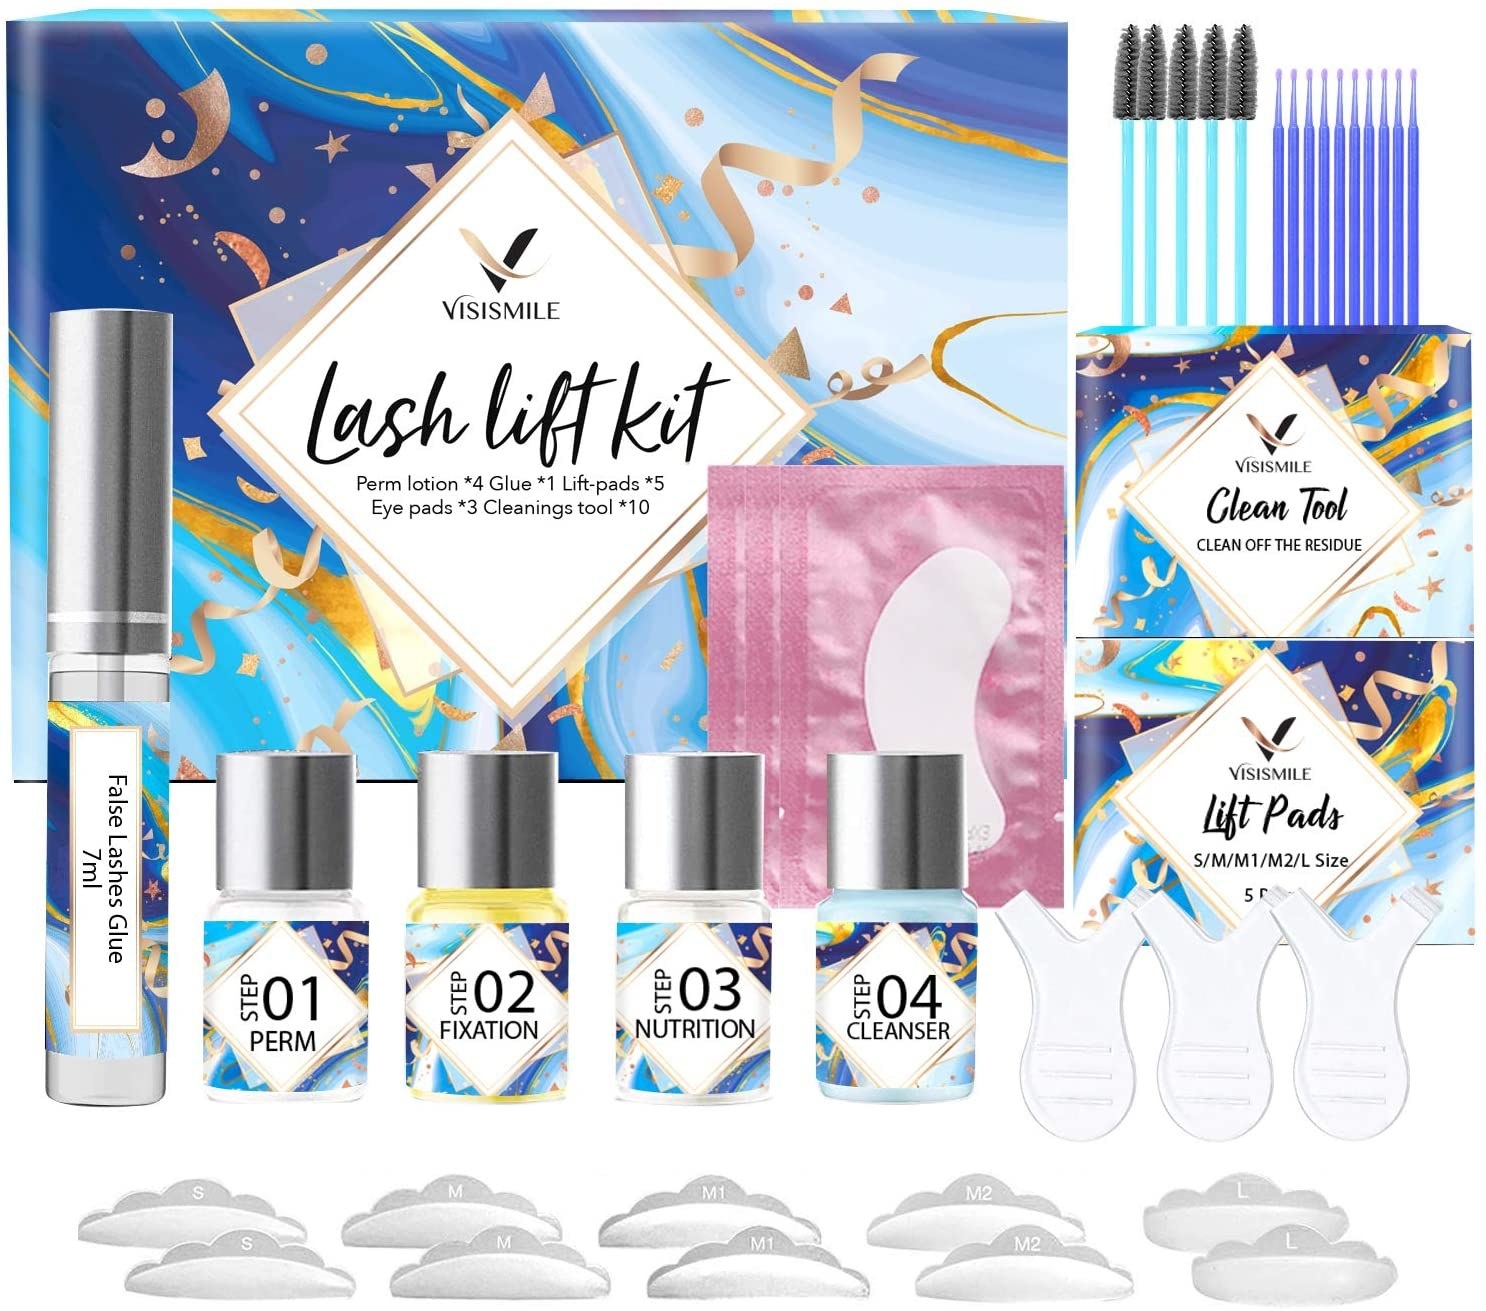 The contents of the lash lift kit 